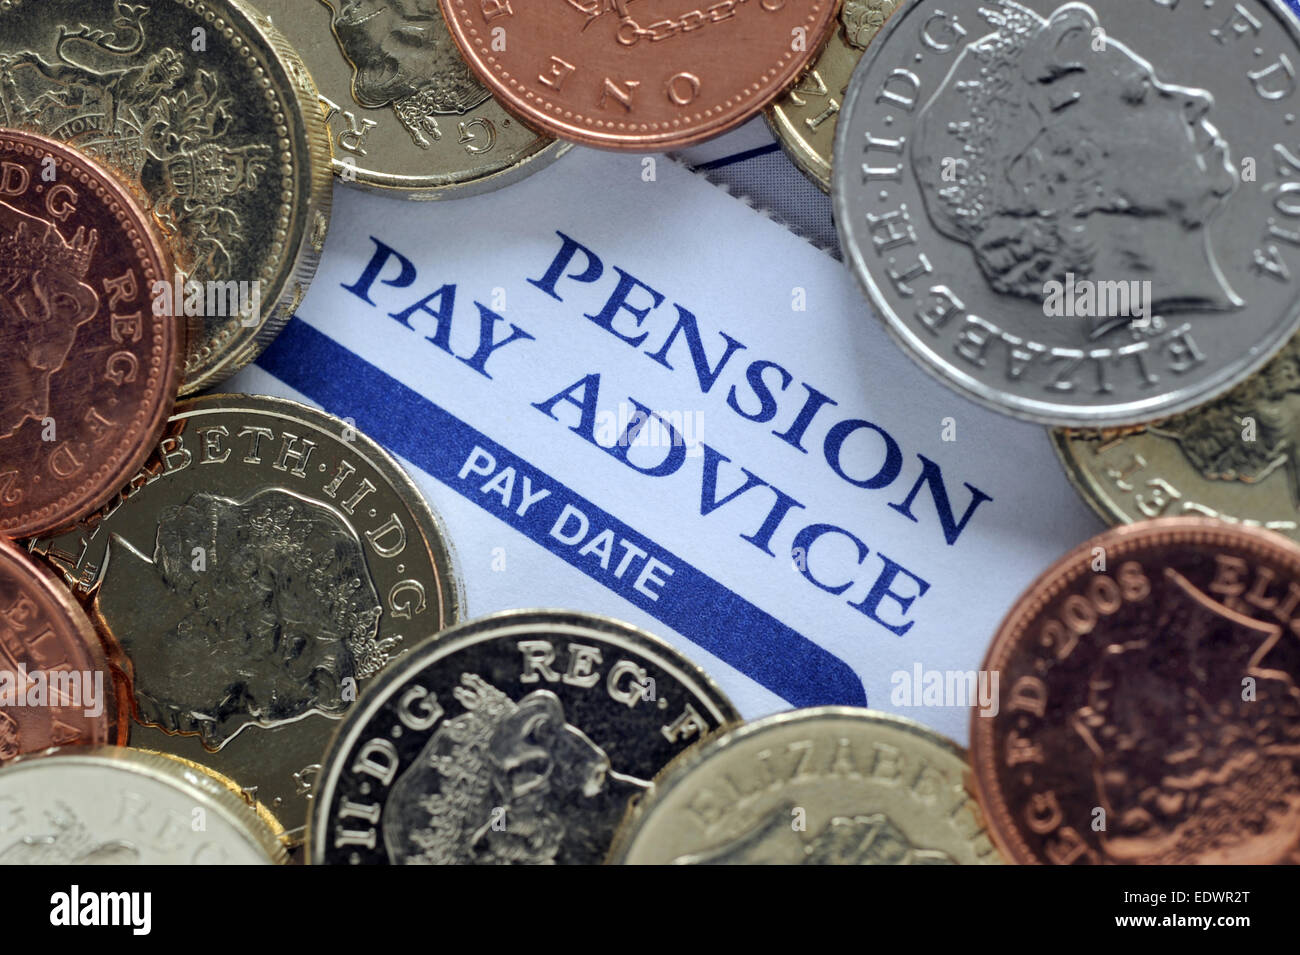 COMPANY PENSION PAY ADVICE WITH MONEY RE COMPANY PENSIONS RETIREMENT PLANNING SAVINGS ANNUNITY FUNDS MONEY CASH PRIVATE UK Stock Photo